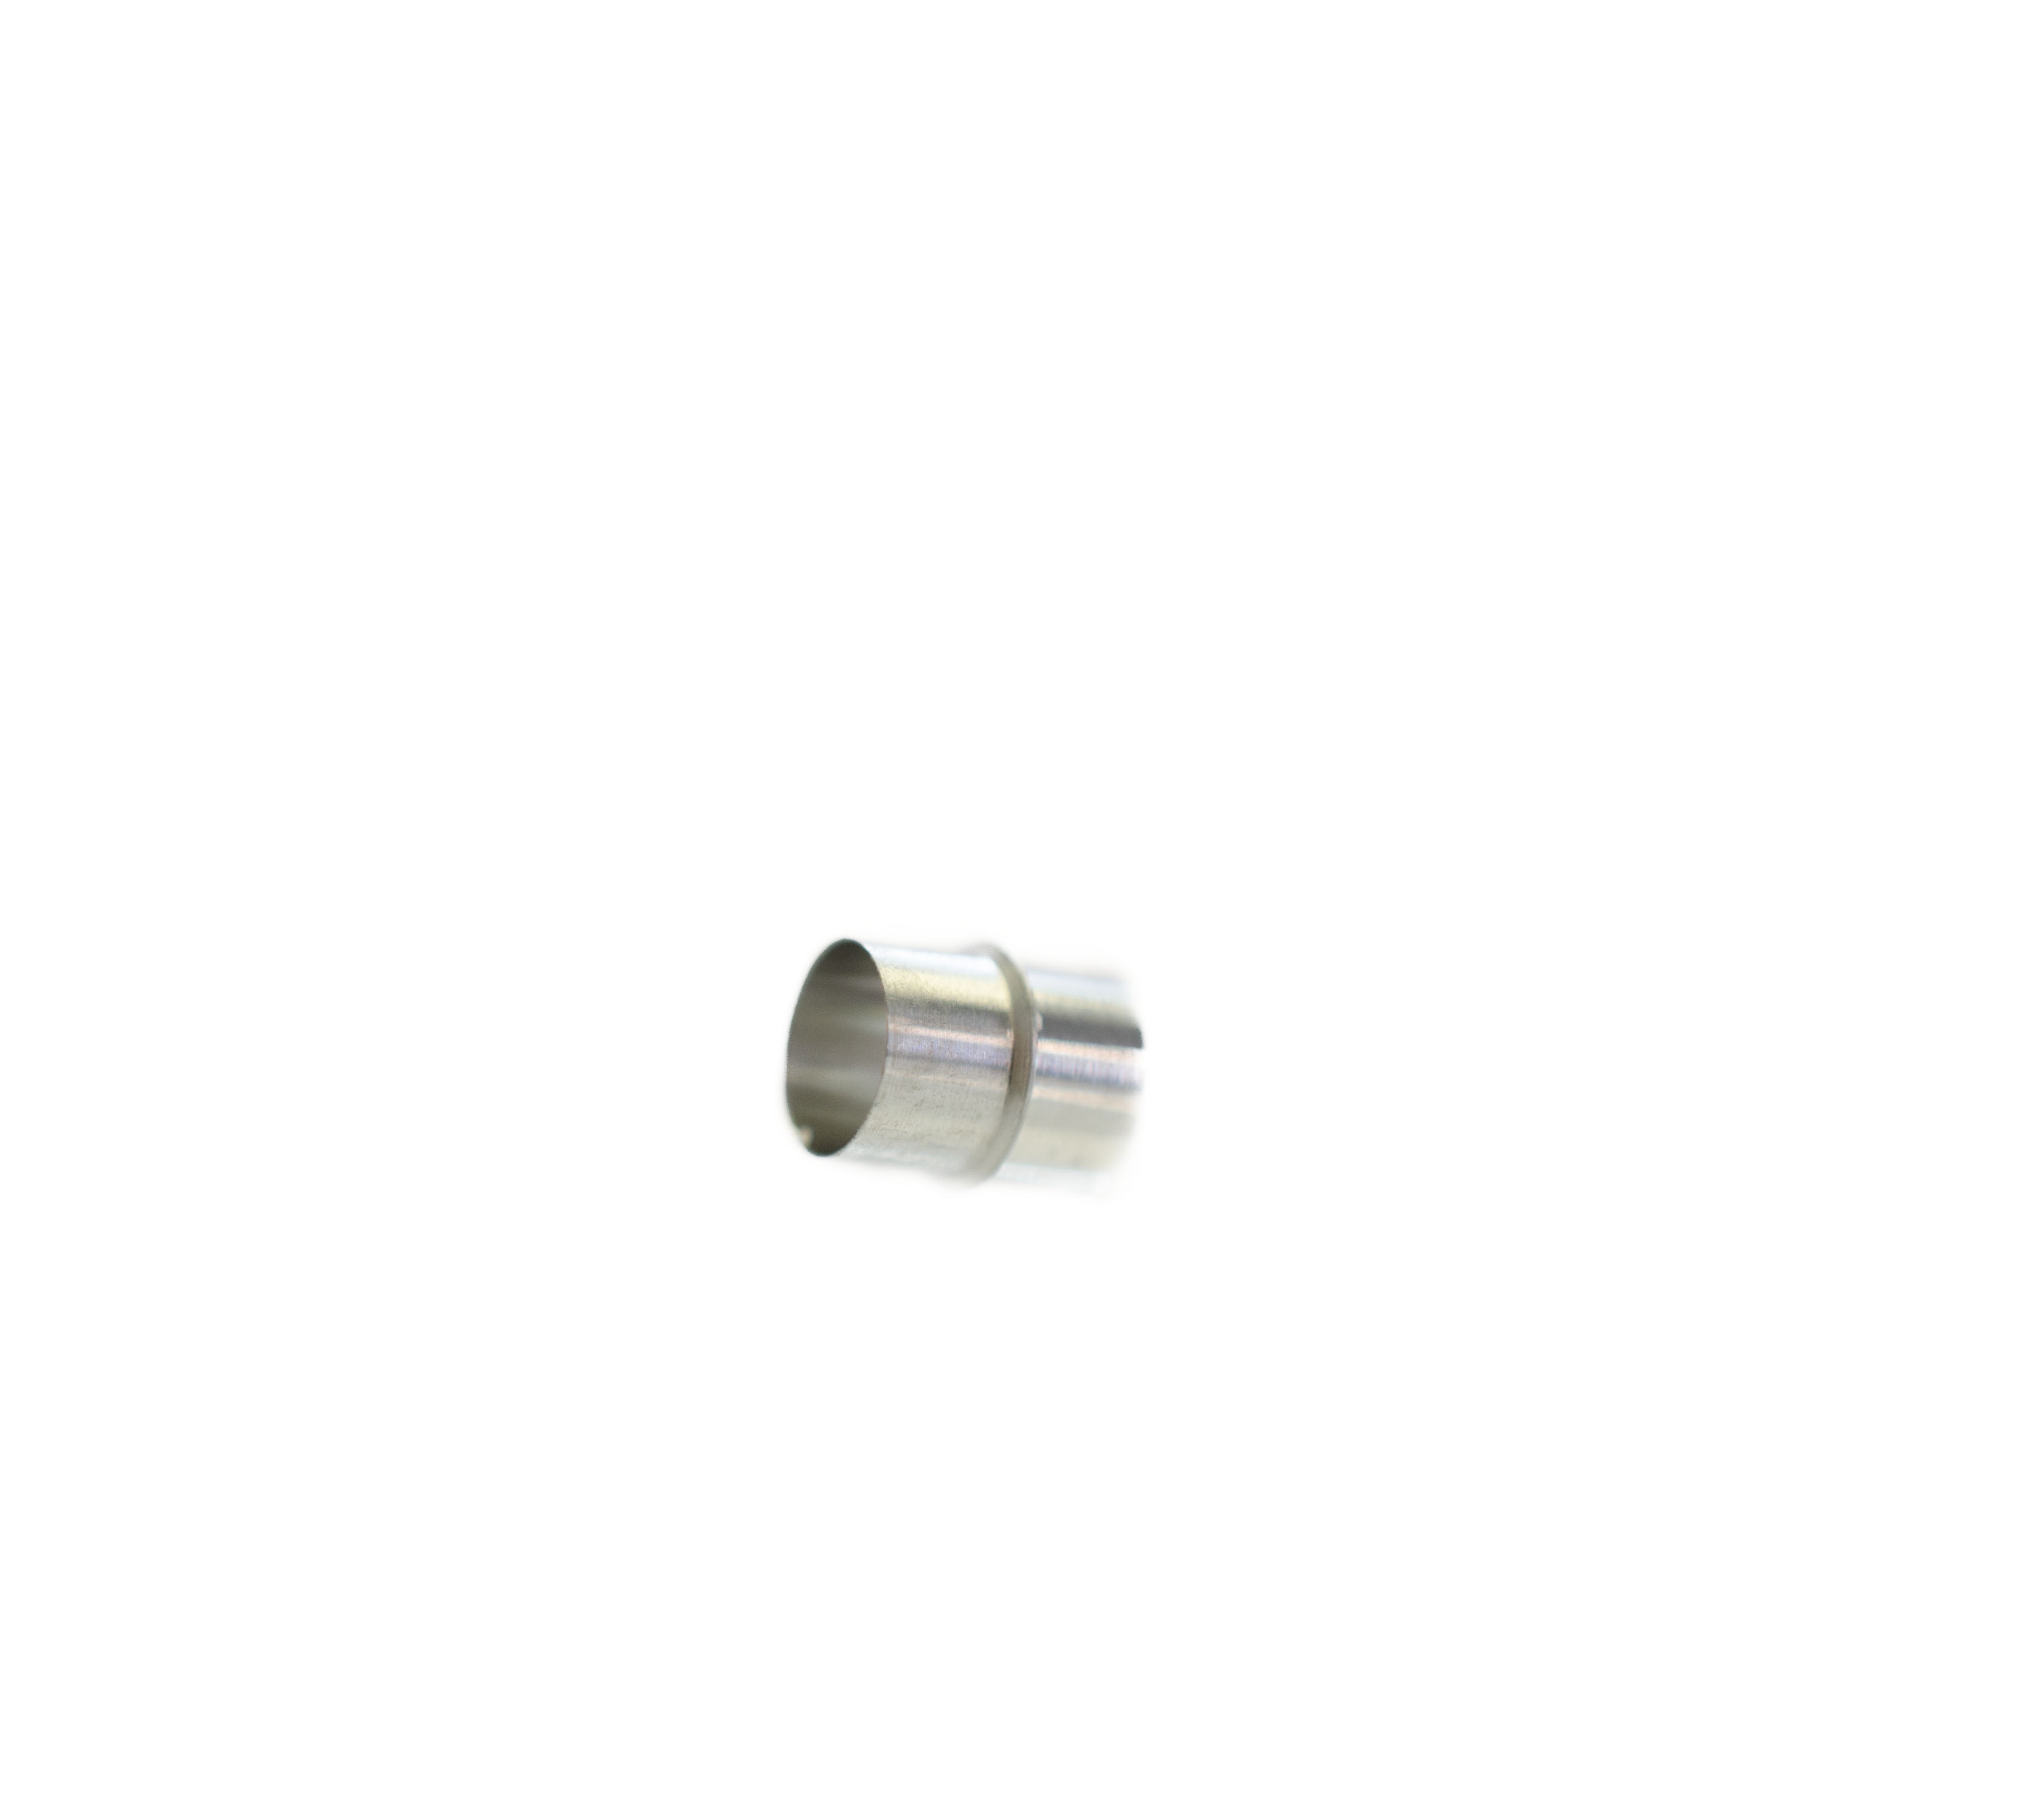 (OEM Compatible) Biopsy Channel Connector Sleeve (Insert) - BF-1T180, BF-1T60 (3.00 mm)